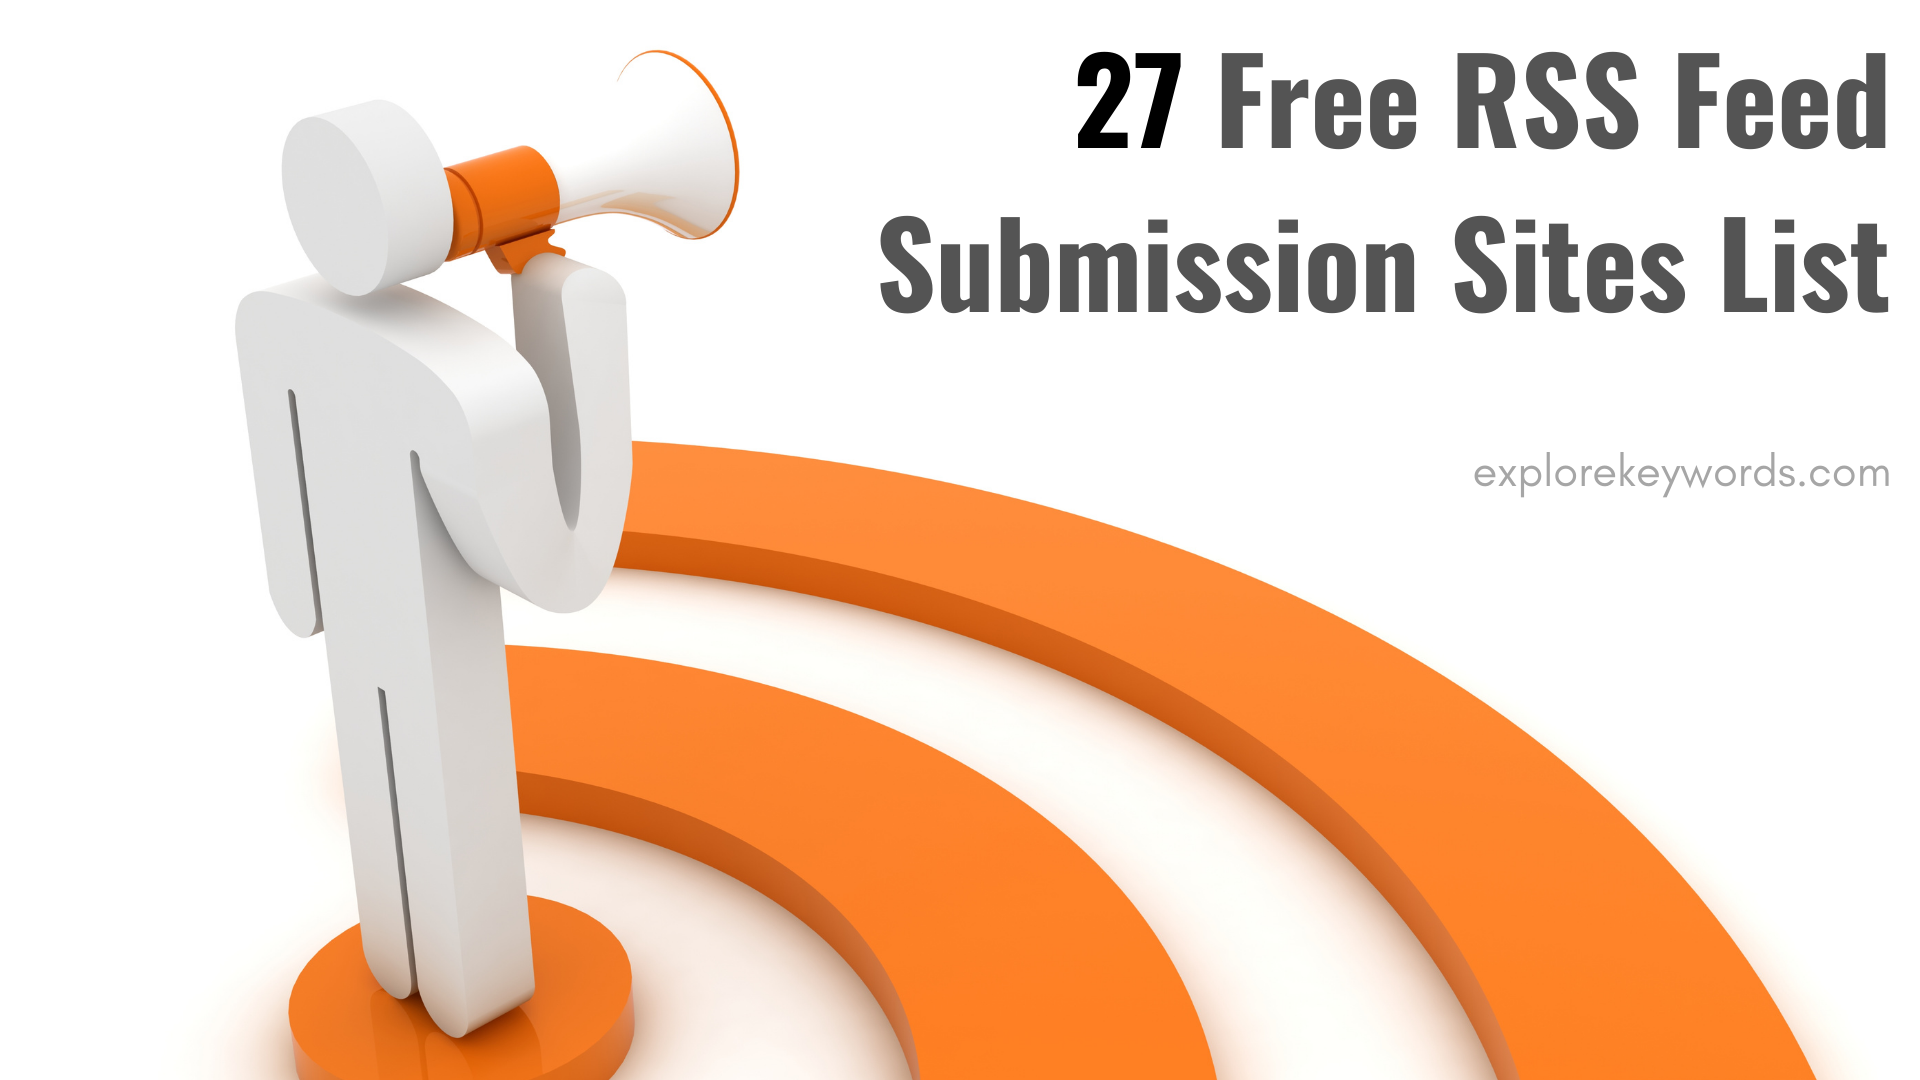 27 Free RSS Feed Submission Sites List